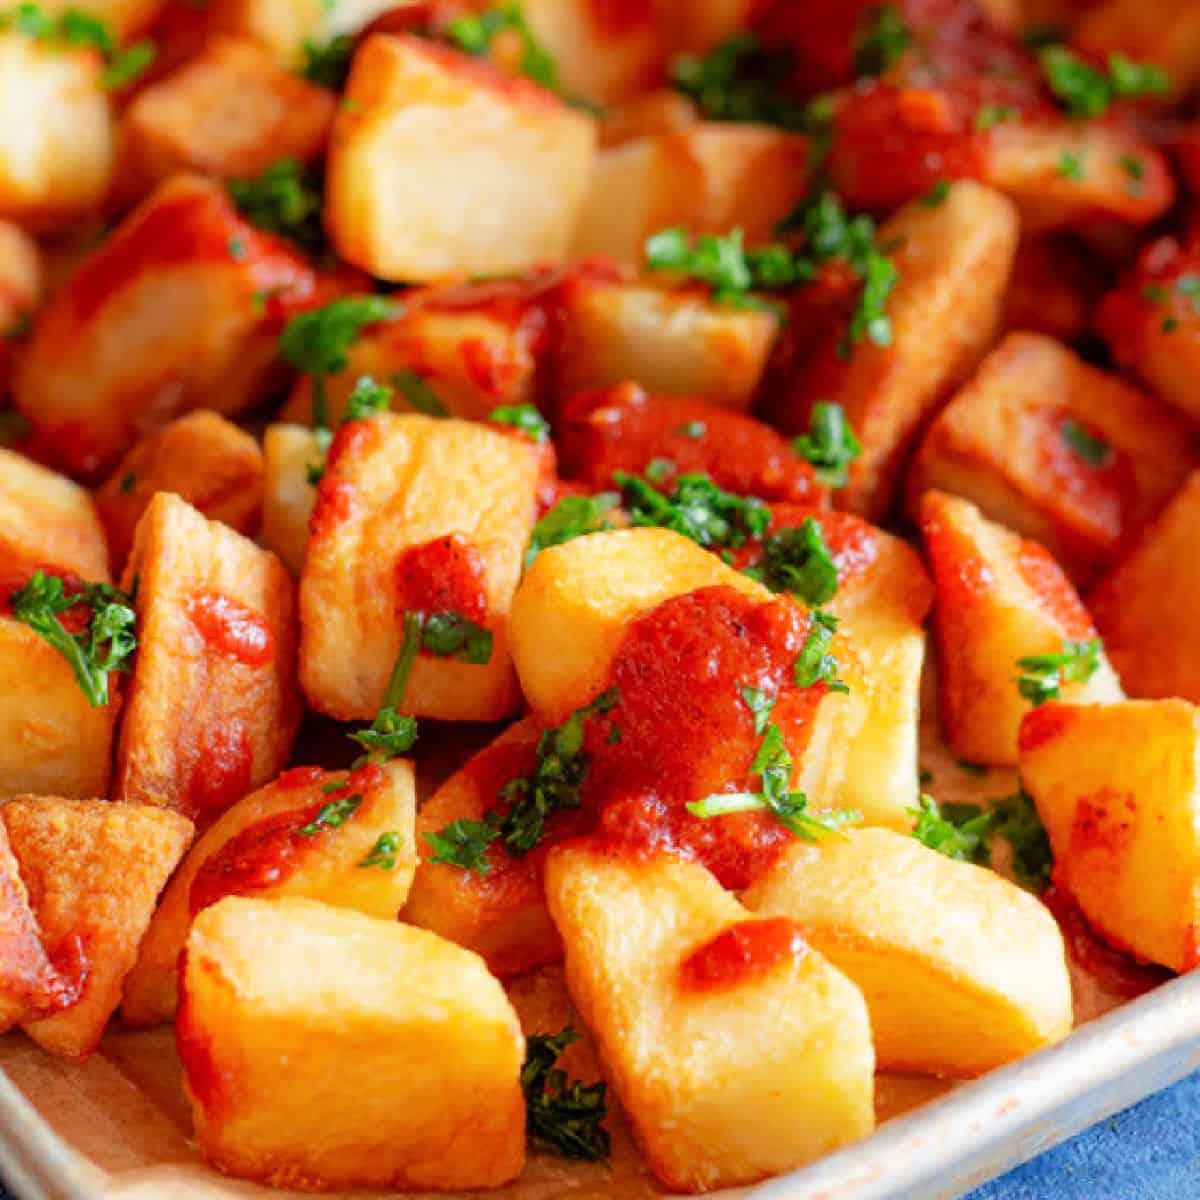 Patatas bravas is a classic Spanish tapas dish. Crispy potatoes topped with spicy tomato sauce and garlic aioli makes a simple but tasty recipe!